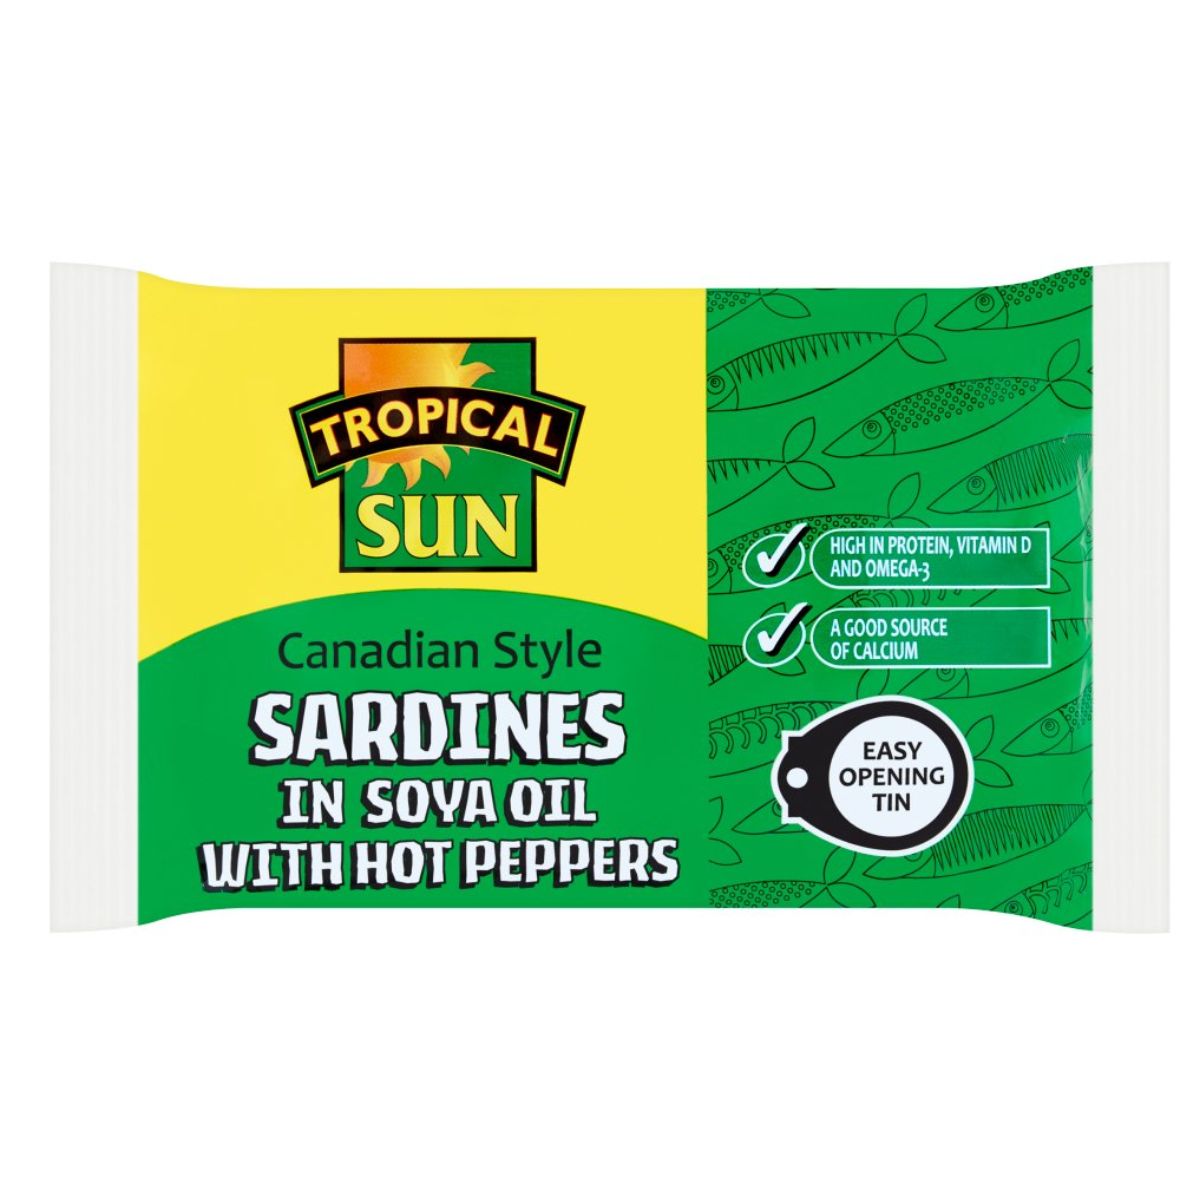 A can of Tropical Sun - Canadian Style Sardines in Soya Oil with Hot Peppers - 106g.